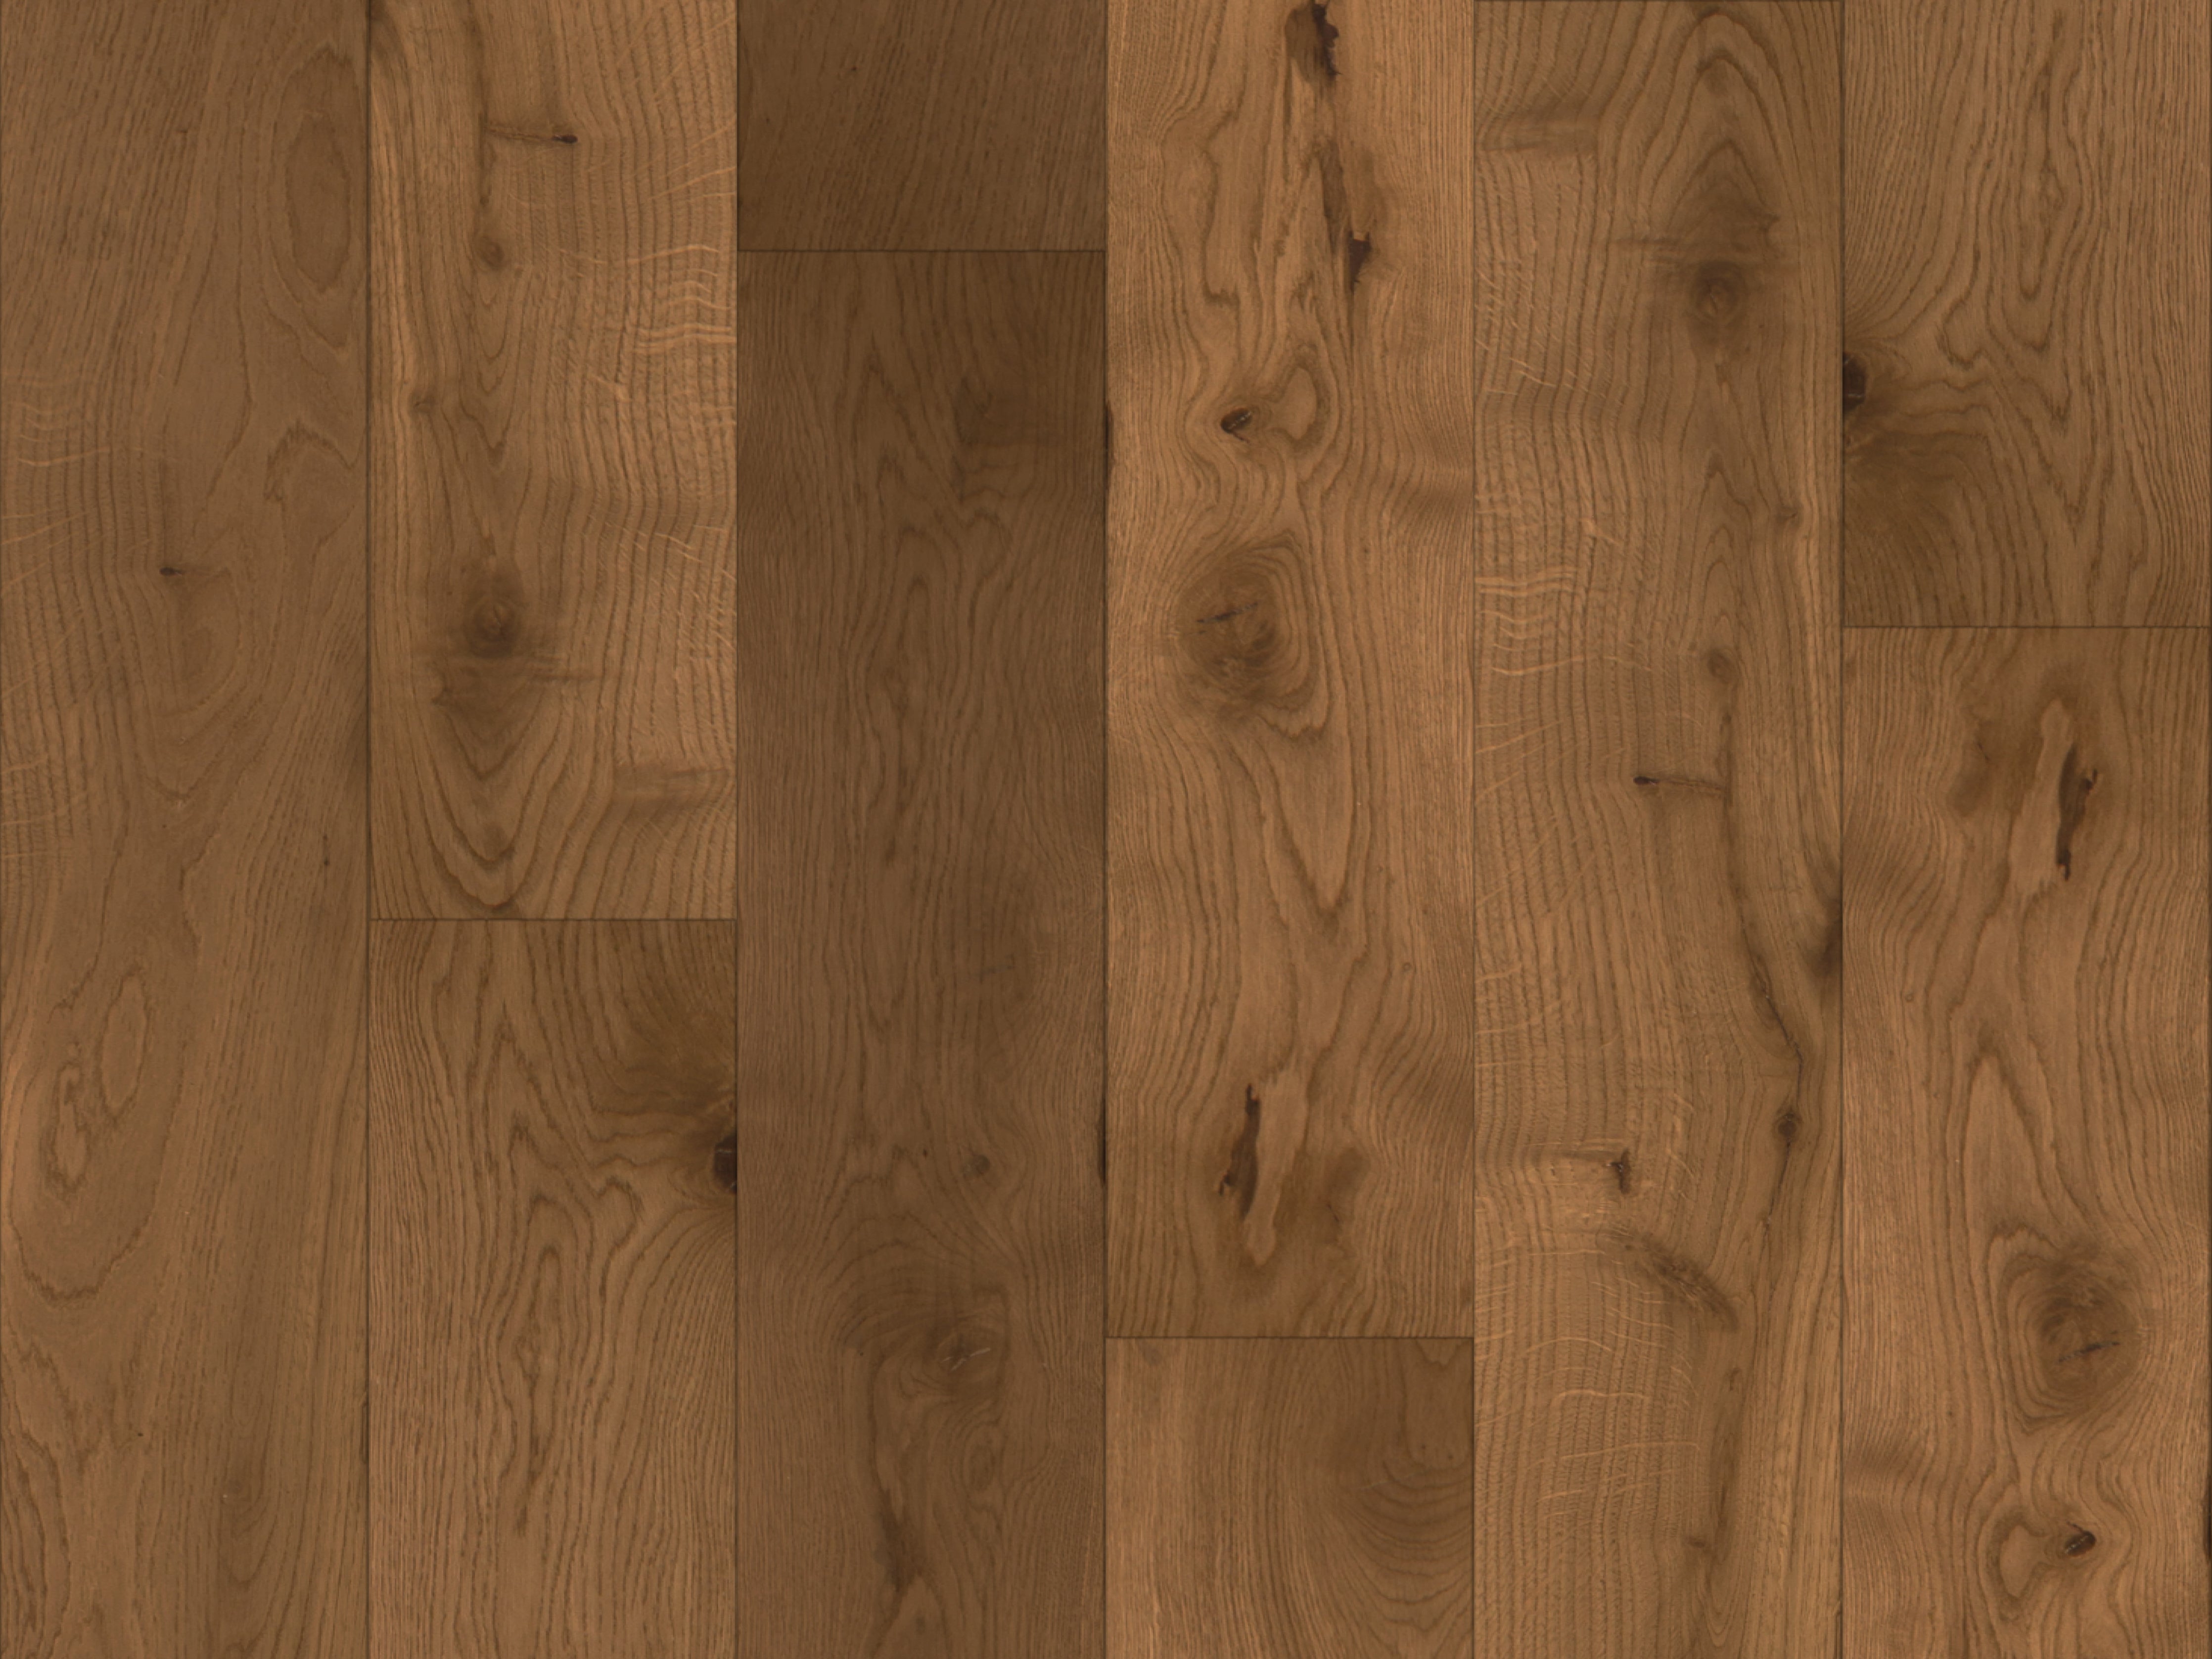 duchateau signature chateau bois fume european oak engineered hardnatural wood floor uv oil finish for interior use distributed by surface group international